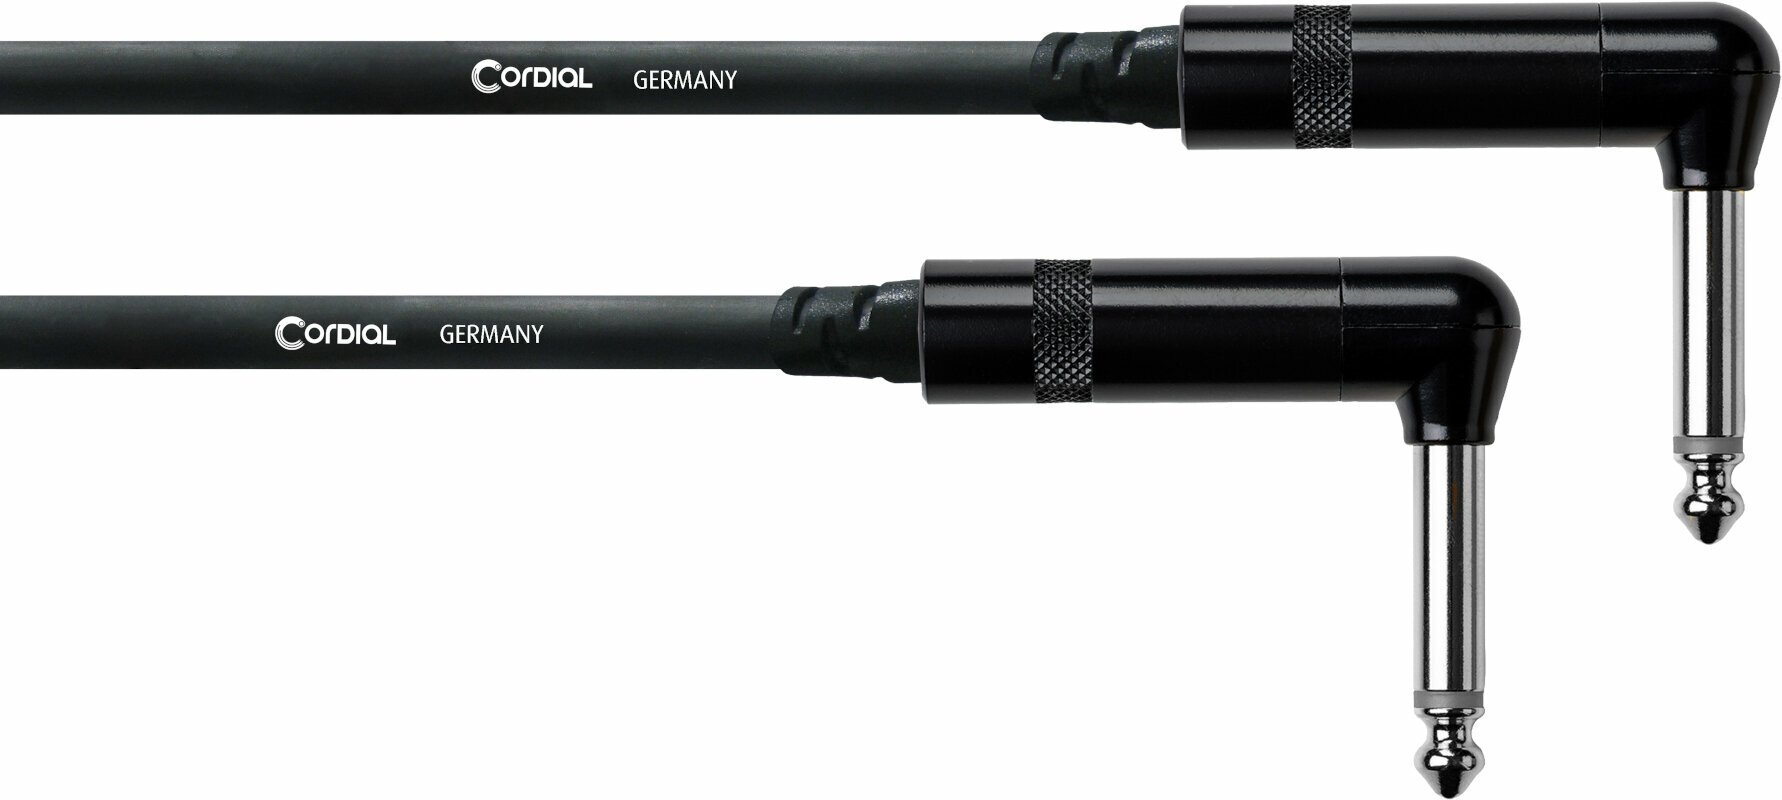 Instrument Cable Cordial CFI 3 RR Black 3 m Angled - Angled